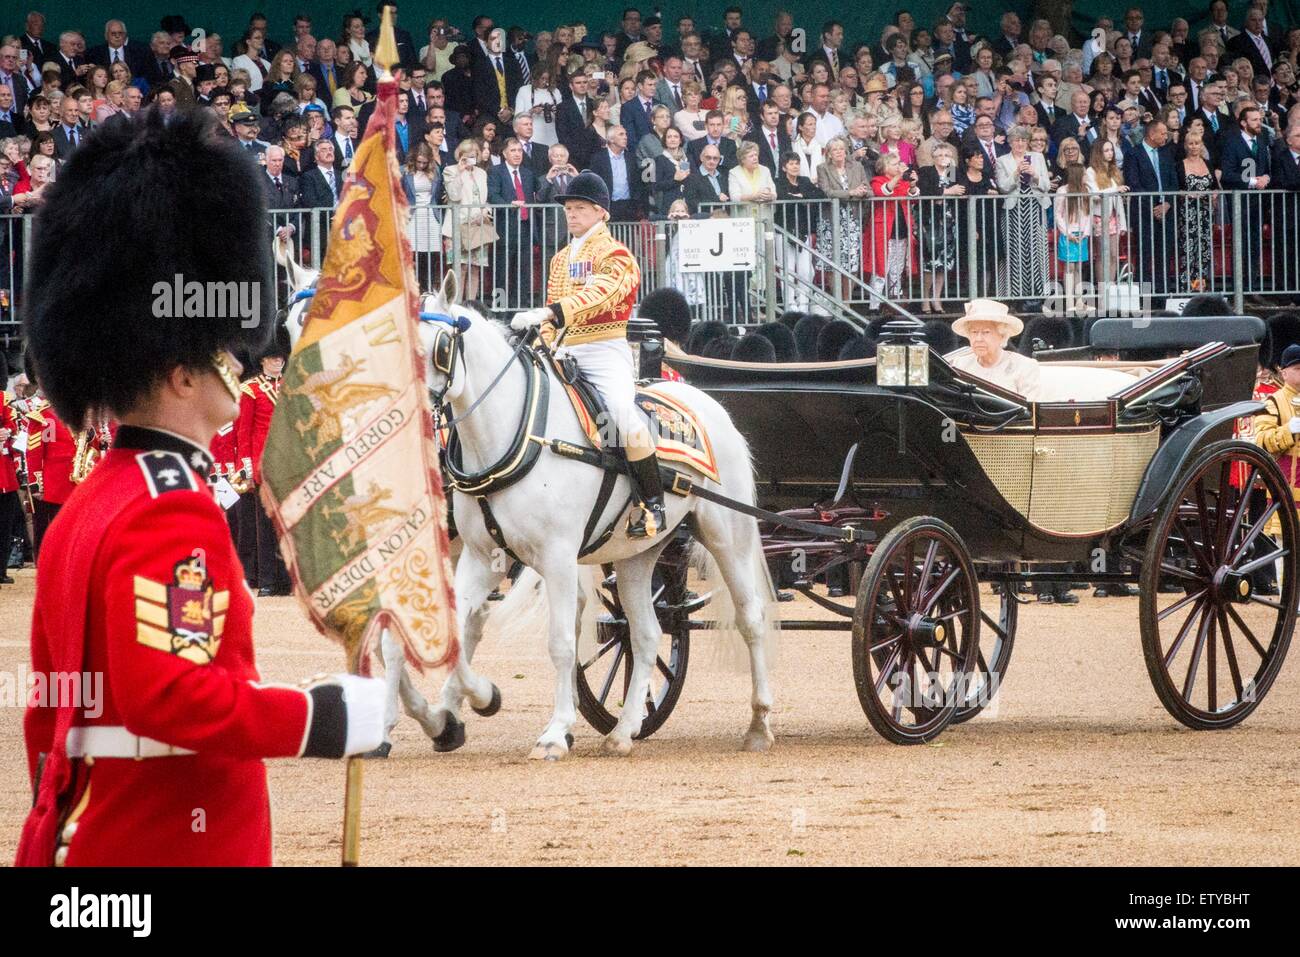 Queen Elizabeth II arrives by carriage for the annual Trooping the Colour parade marking her official birthday on Horse Guards Parade June 13, 2015 in London, England. Stock Photo